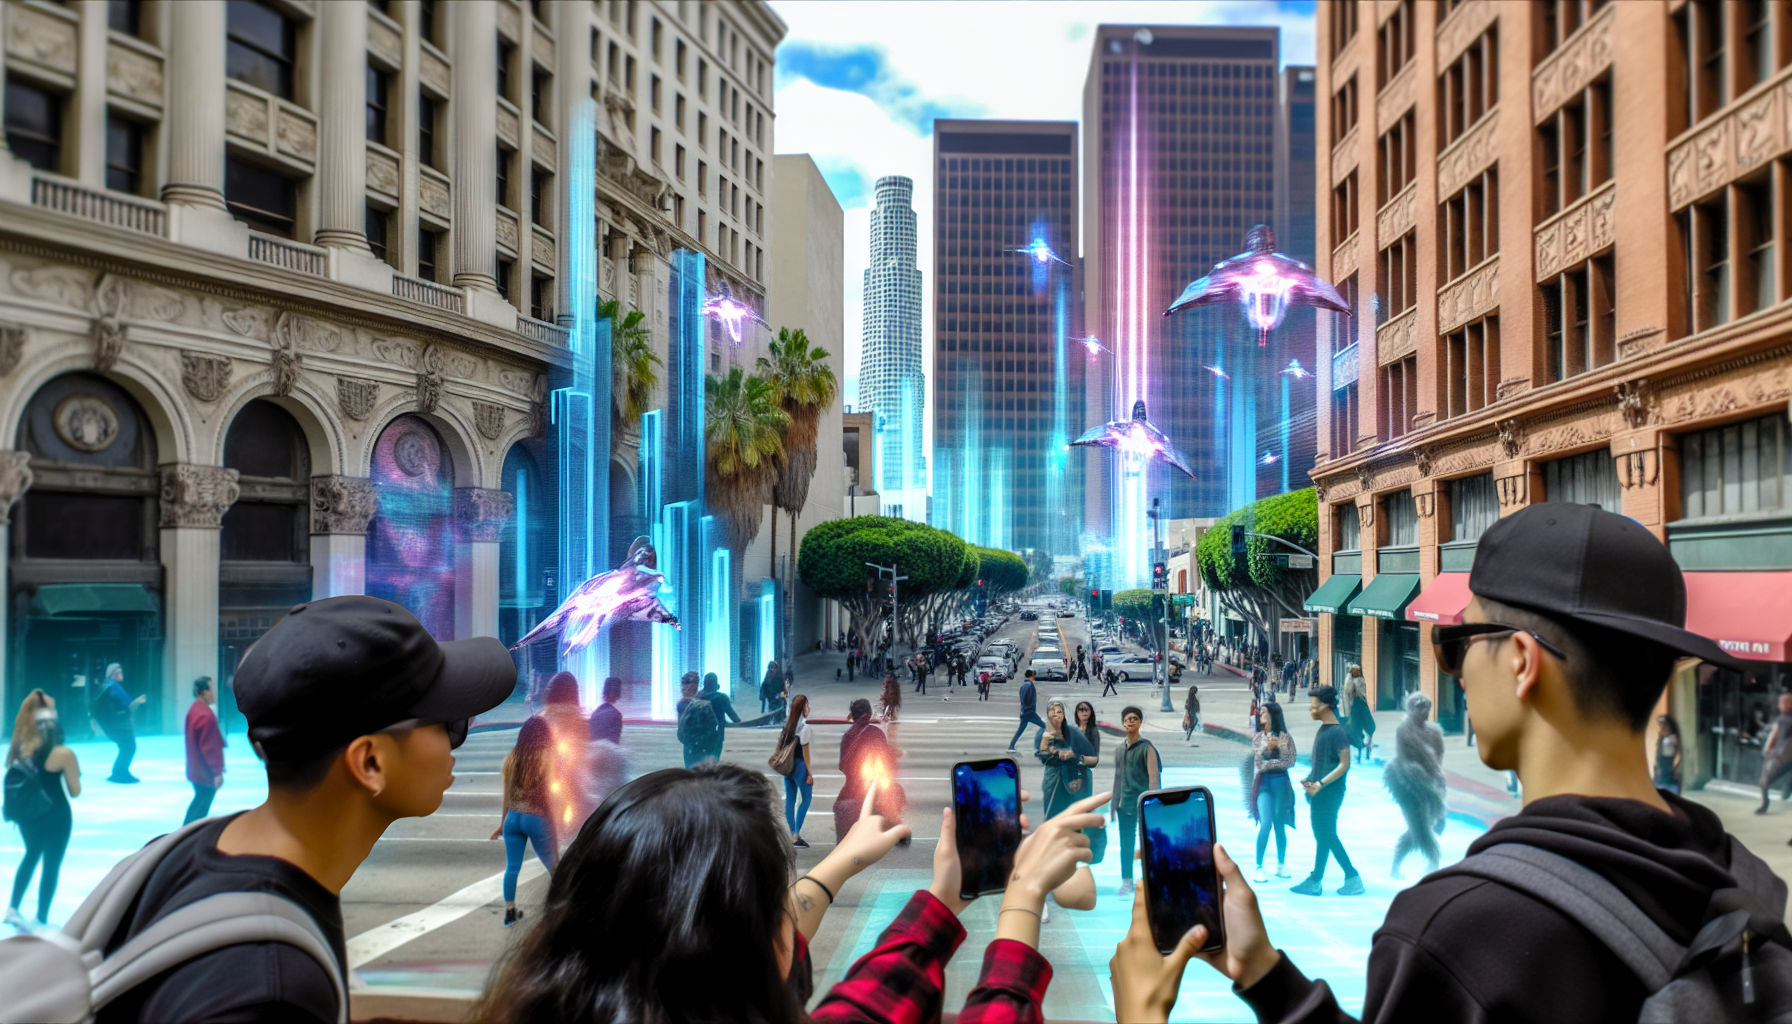 A vibrant AR experience on the streets of Los Angeles